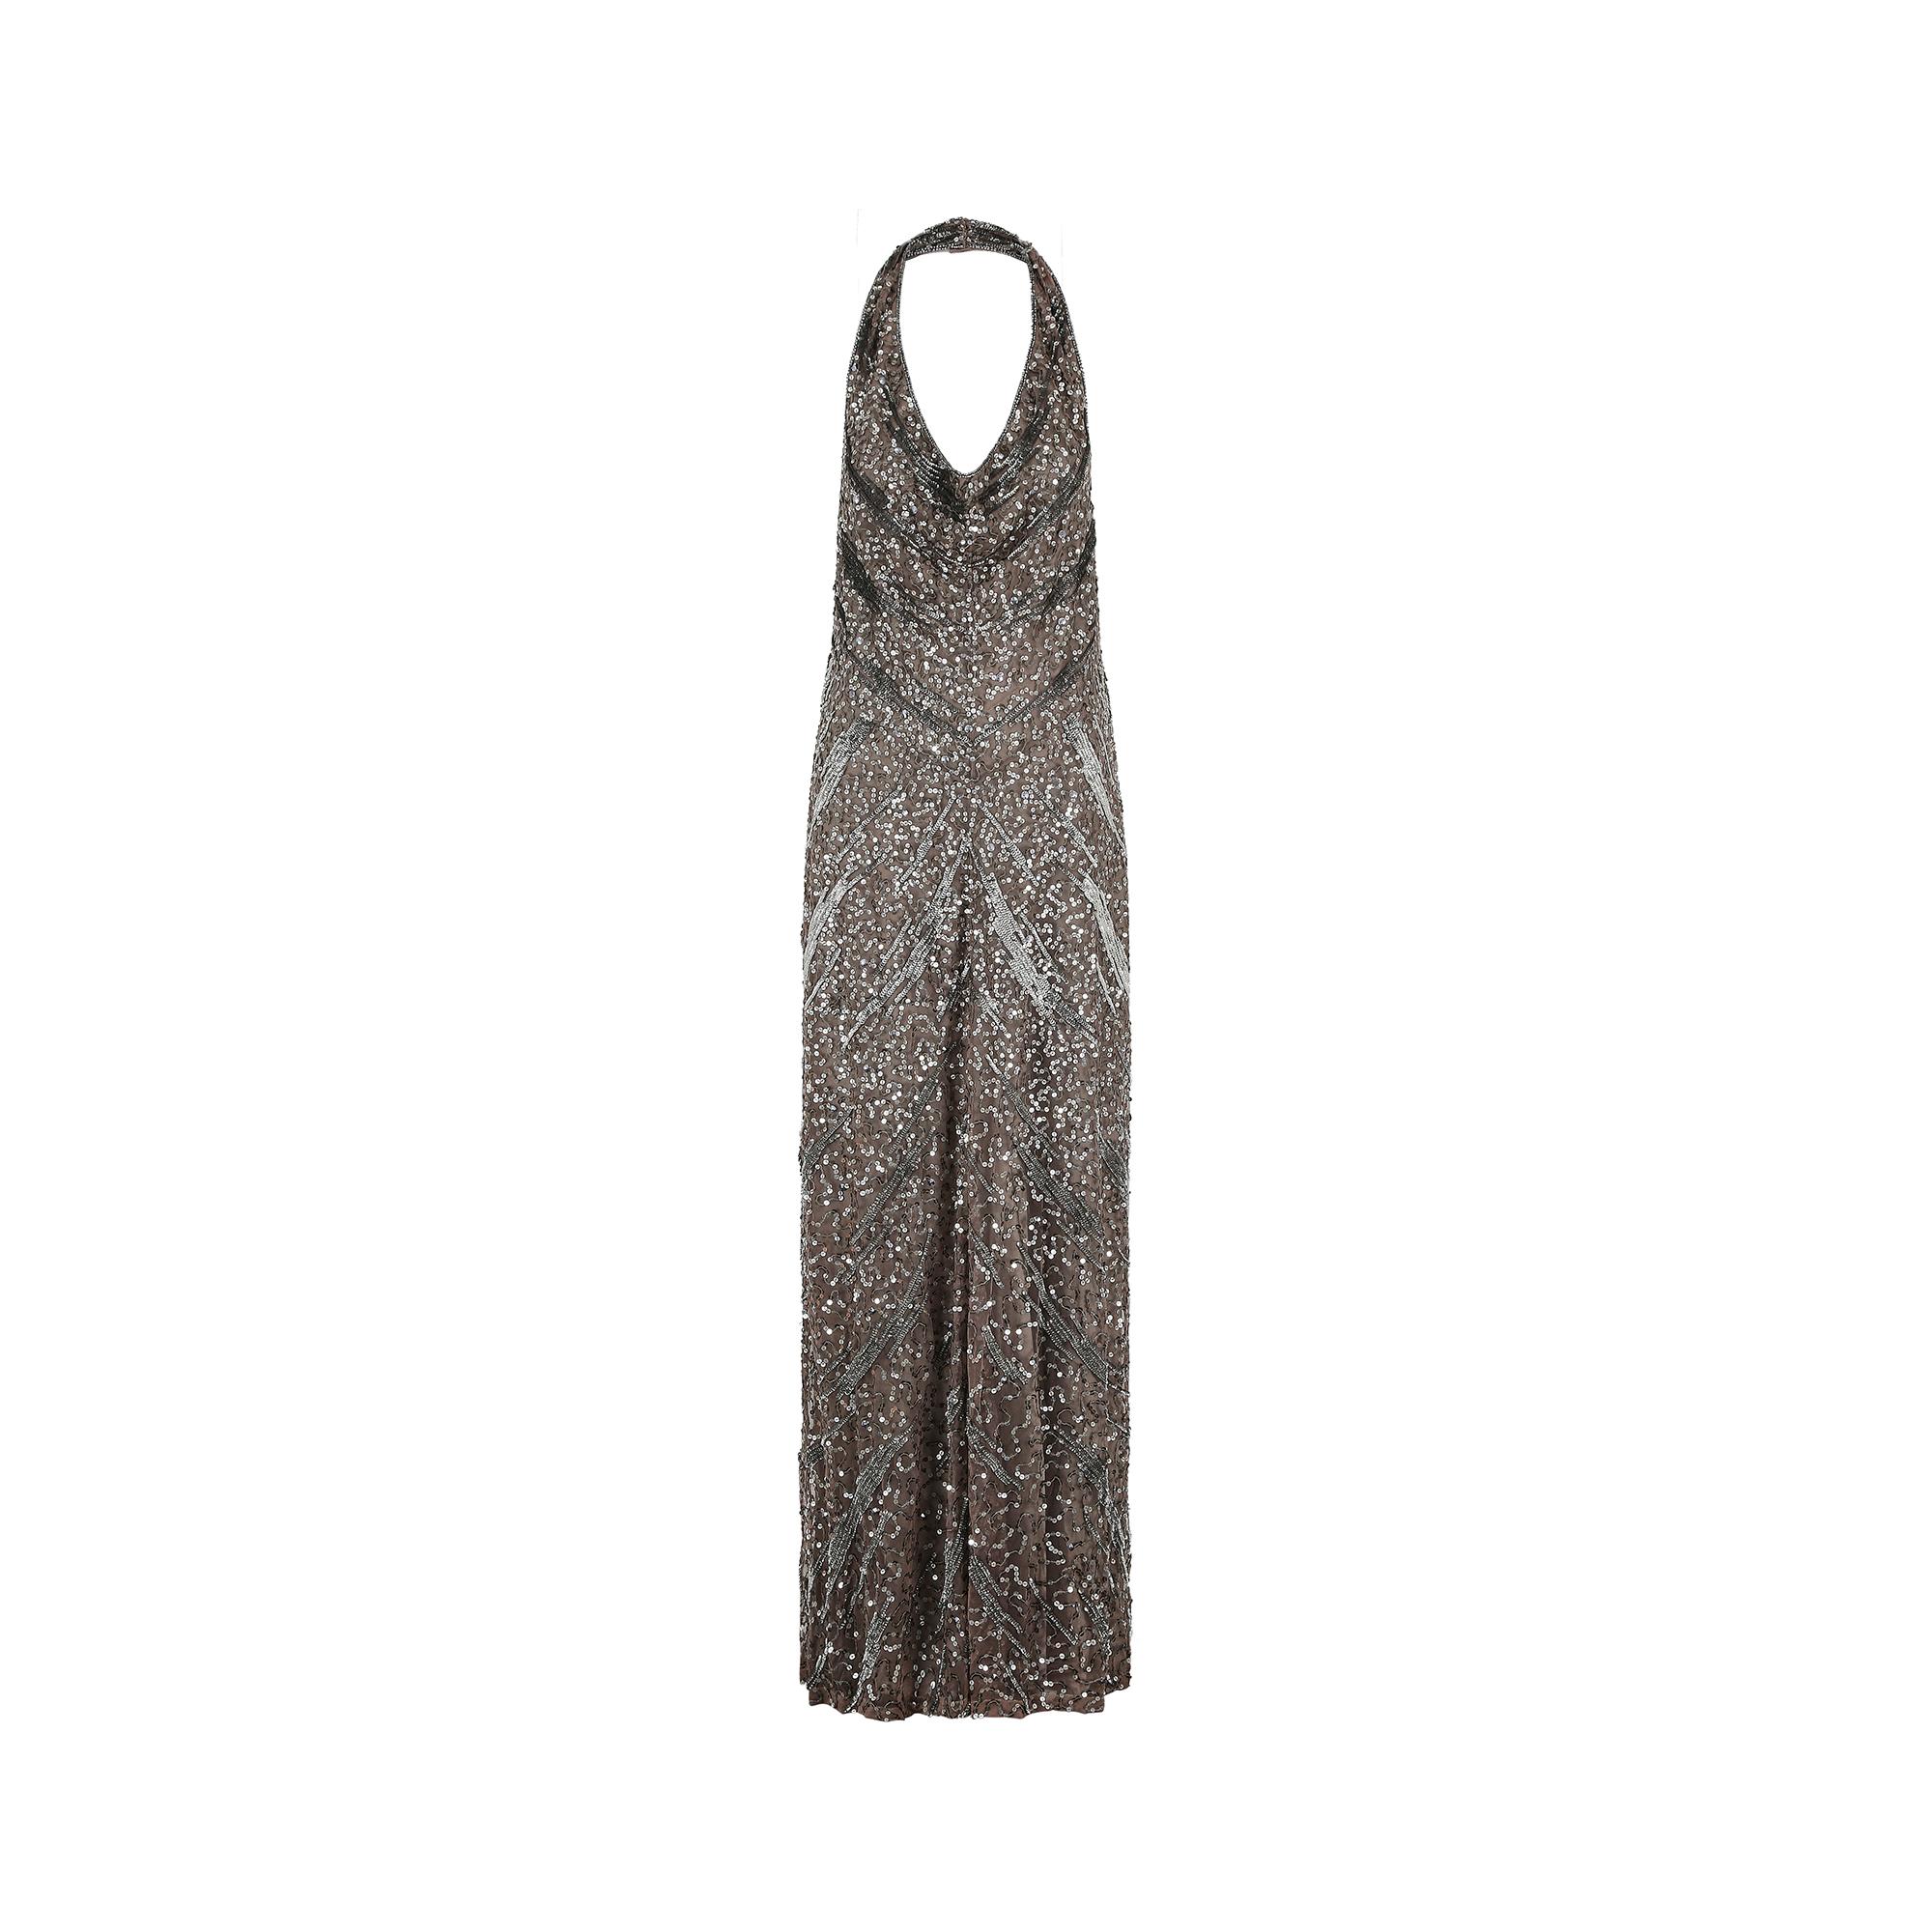 You're sure to turn eyes wearing this Max Mara evening gown, circa 2006-2007, just in time for the holiday and awards season. This showstopper of a dress reflects the 2000s Max Mara aesthetic and perfectly encapsulates the 'quiet luxury' trend for